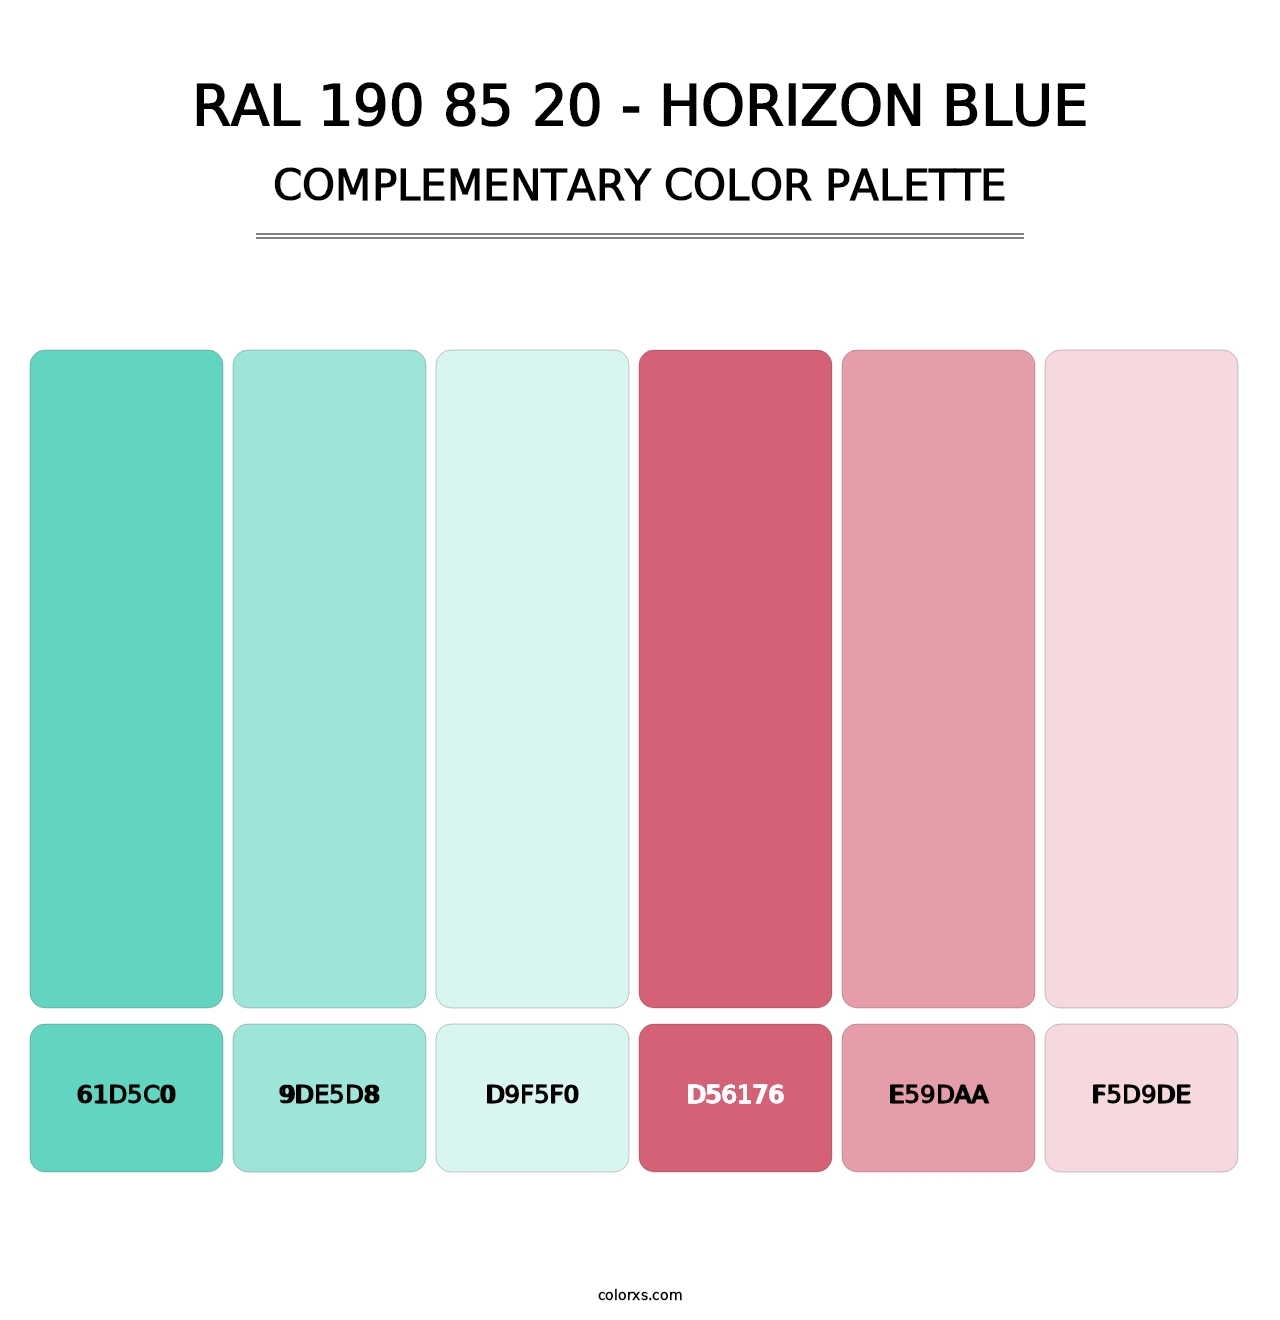 RAL 190 85 20 - Horizon Blue - Complementary Color Palette